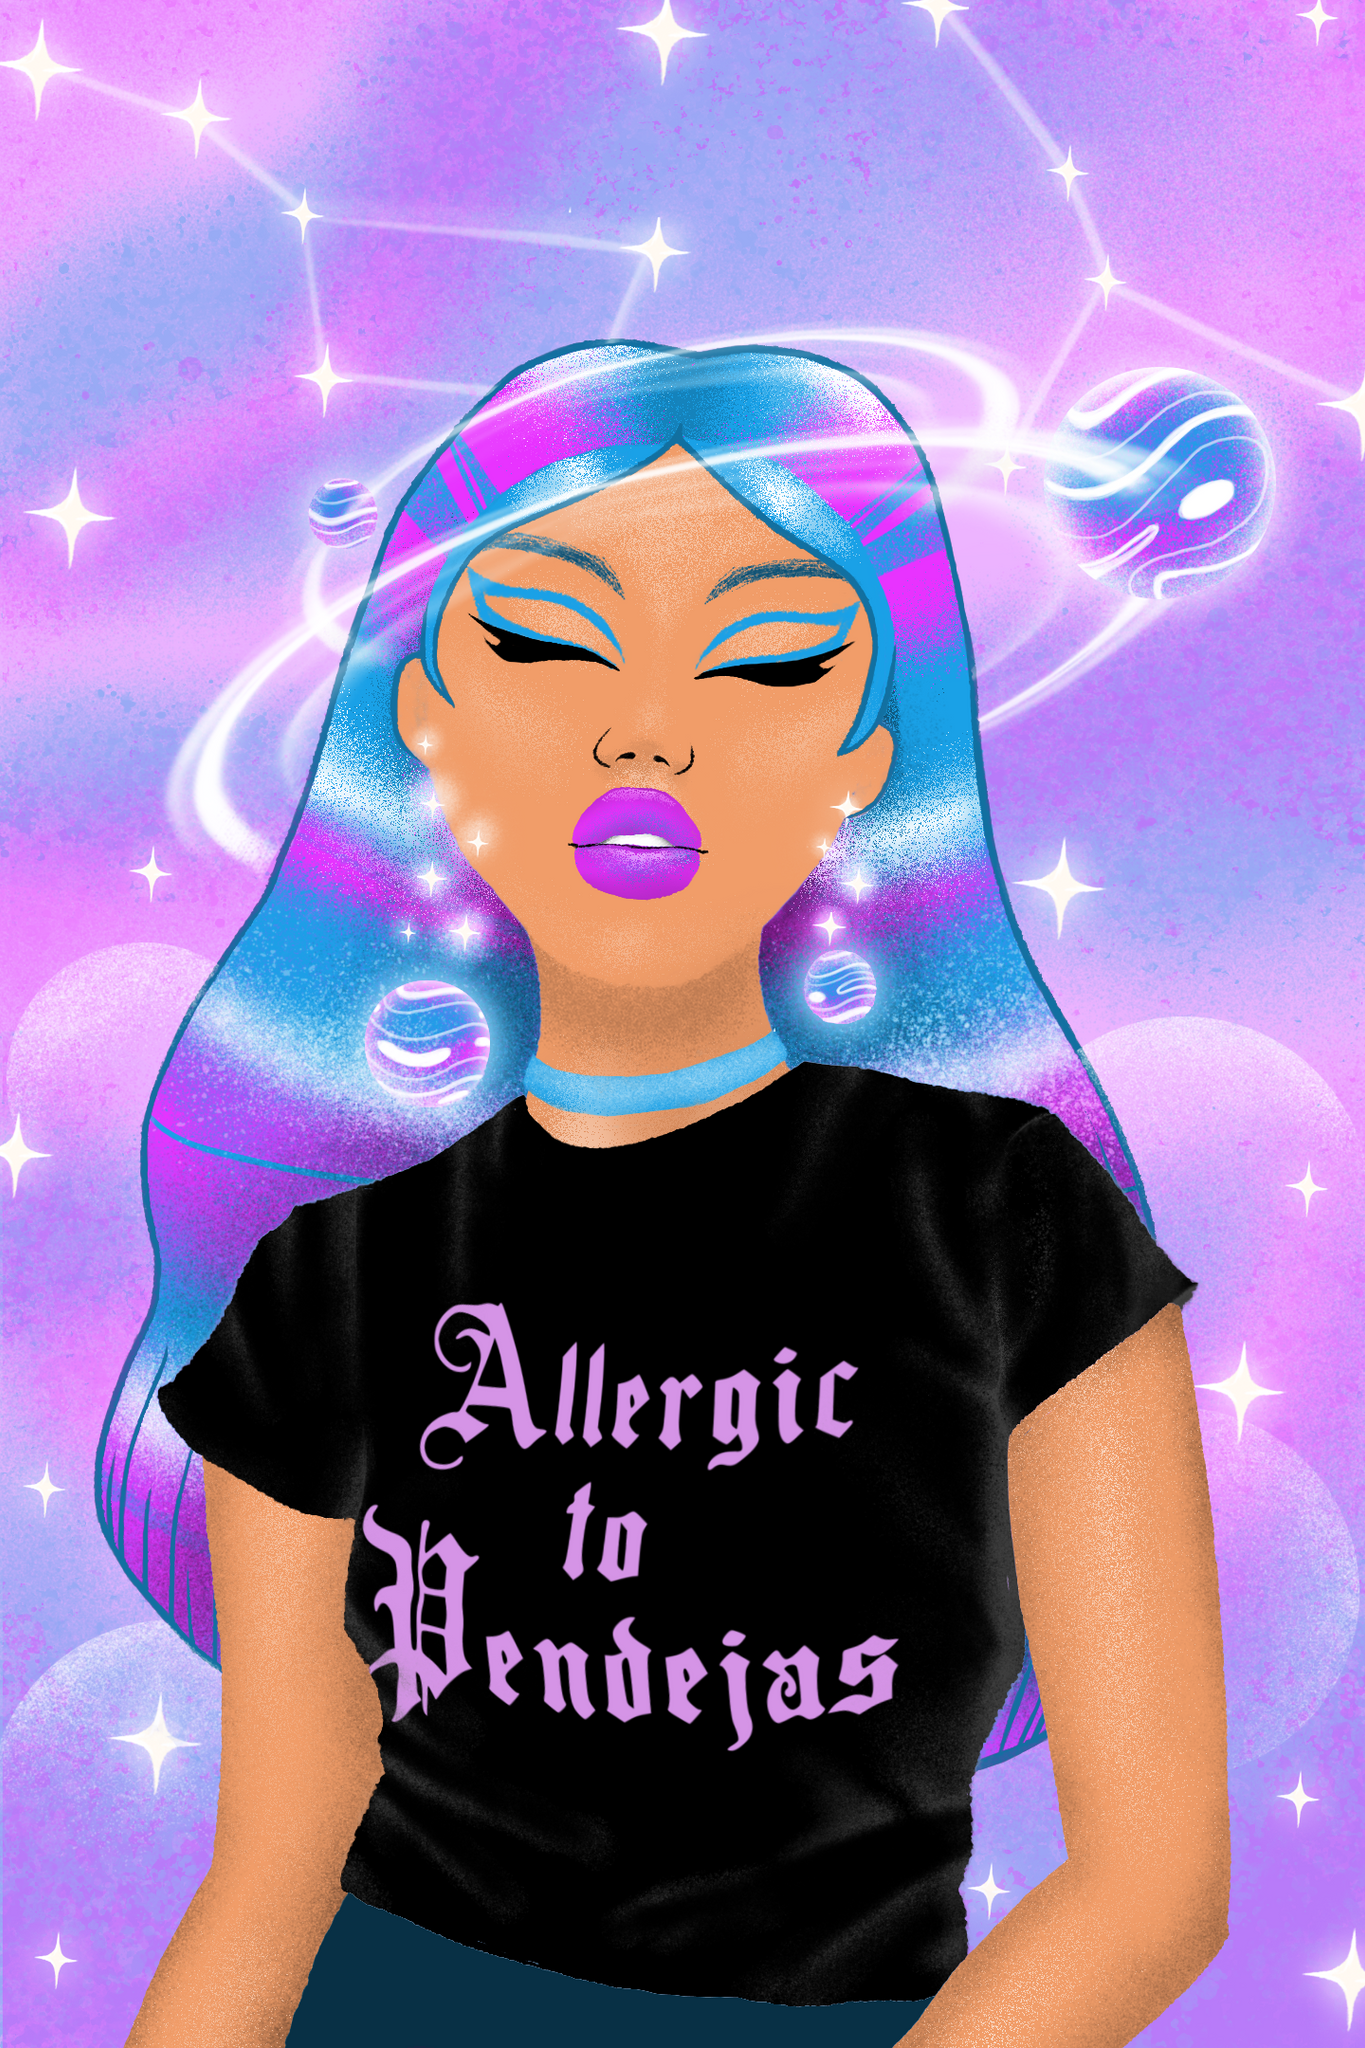 T-shirt featuring humorous chola-style, old-english text for Latinas, reading 'allergic to pendejas'